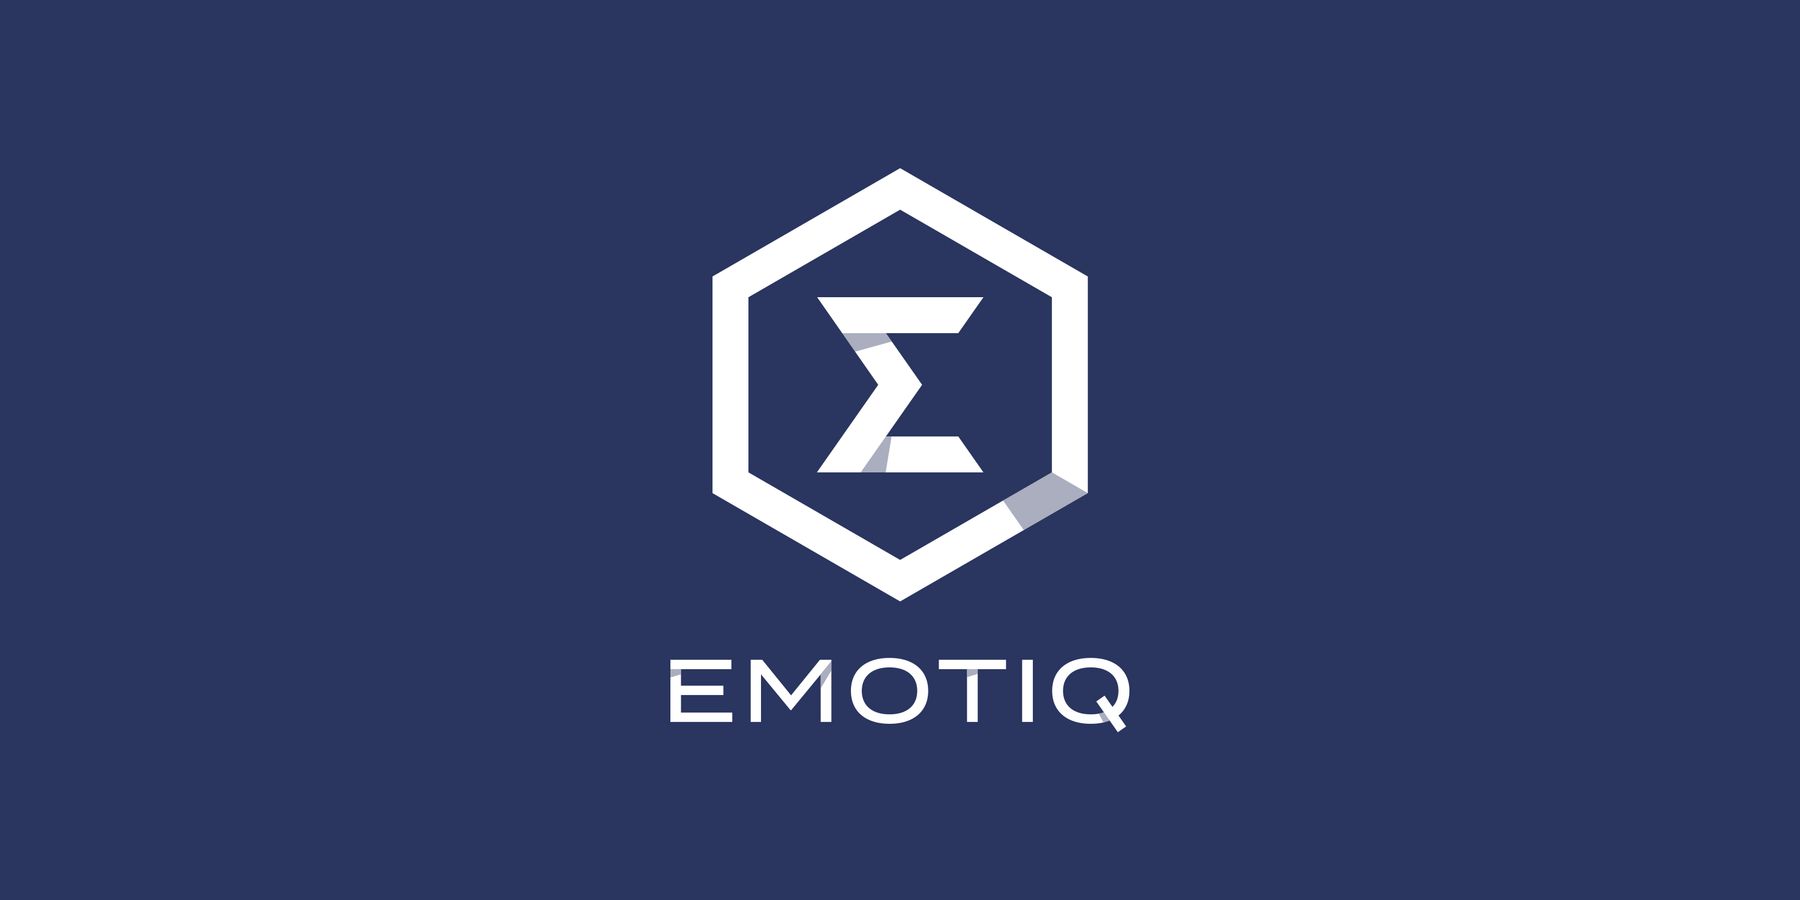 Emotiq - a Next-Generation Blockchain with Powerful Scalability and Privacy